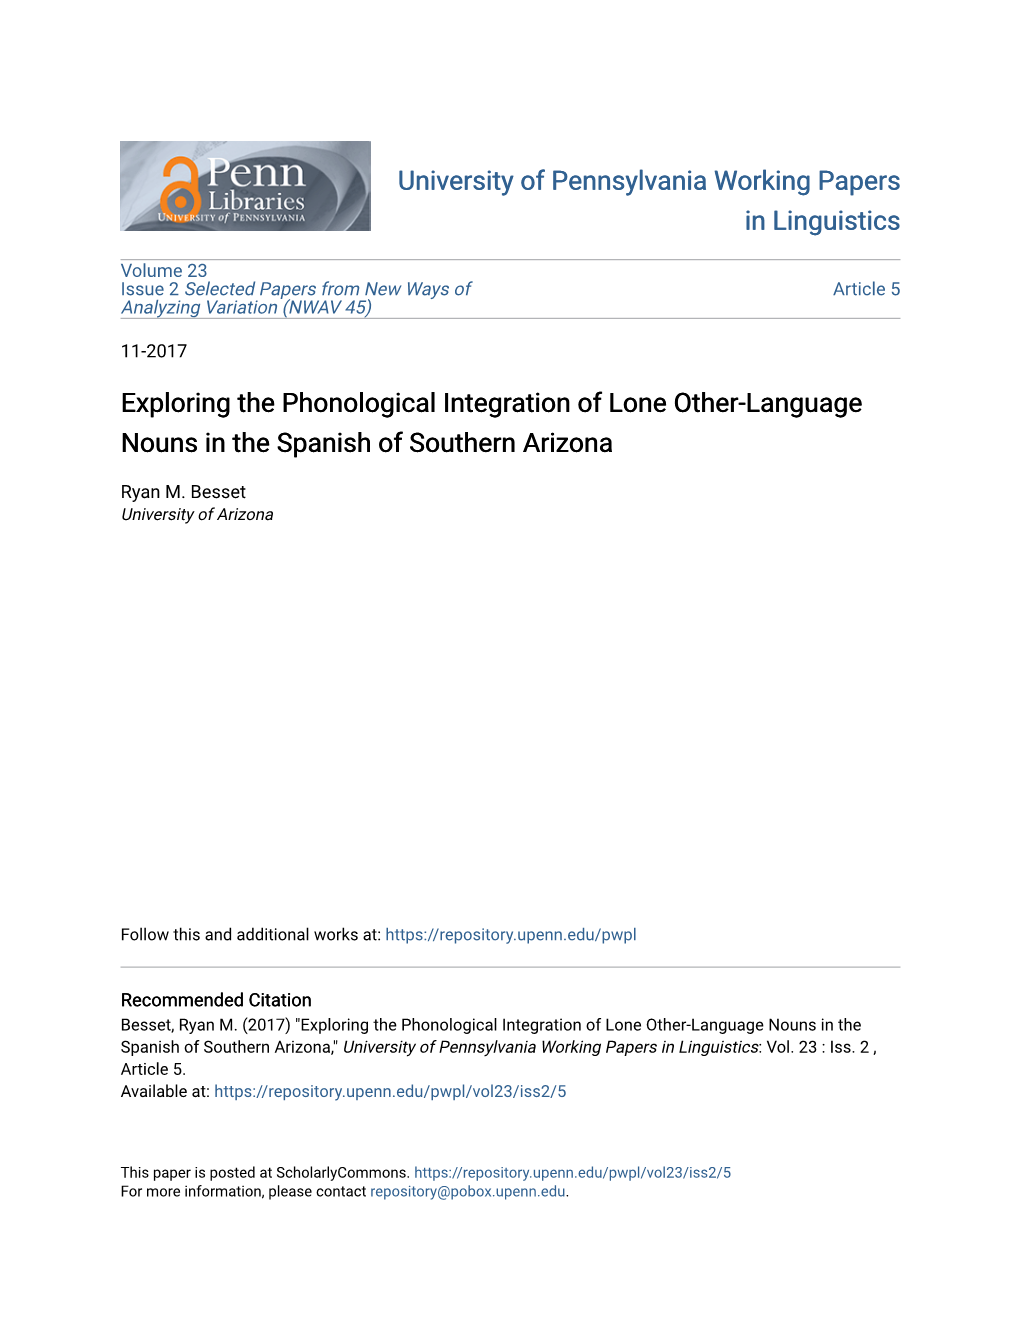 Exploring the Phonological Integration of Lone Other-Language Nouns in the Spanish of Southern Arizona